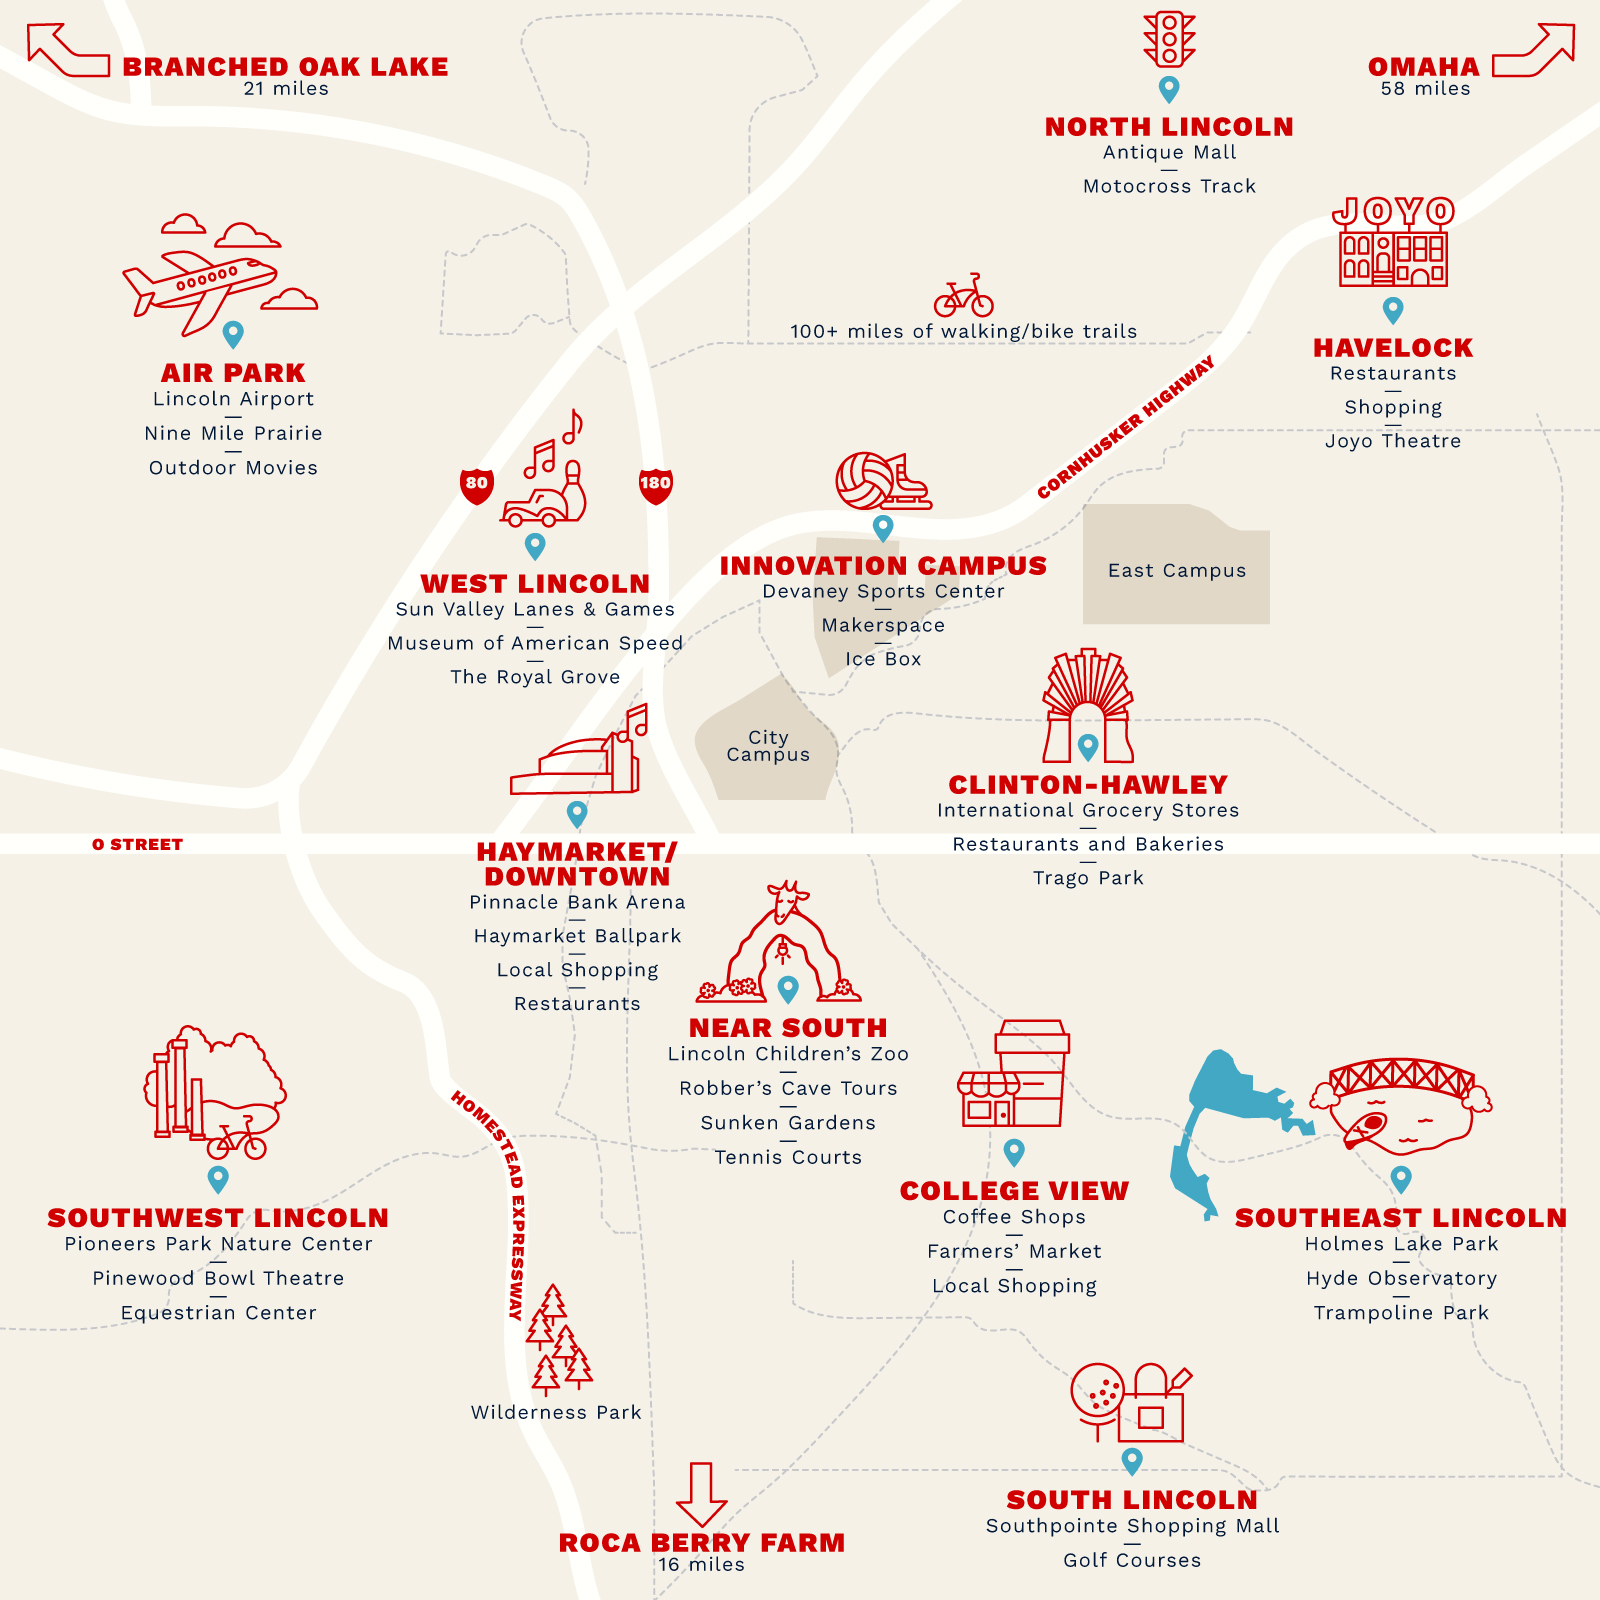 A map of Lincoln shows various neighborhoods and things to do across the city, from seeing a game at the ballpark to shopping in the Haymarket; to visiting Holmes Lake Park and the Hyde Observatory in Southeast Lincoln; to satisfying your latest craving at Clinton-Hawley’s international grocery stores, restaurants and bakeries.